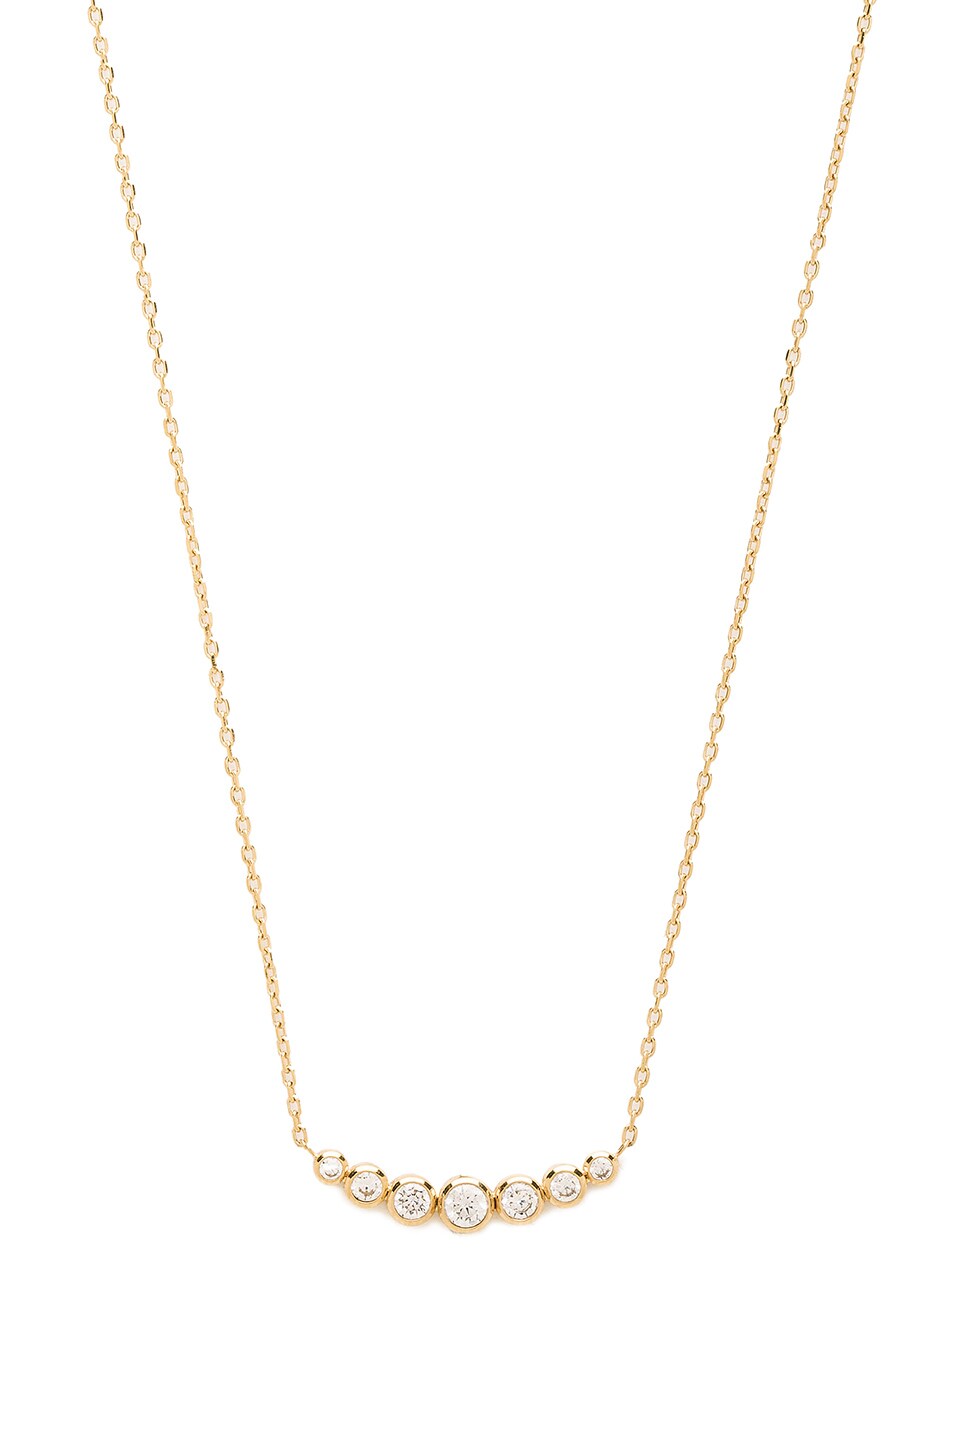 Michael Kors Graduated Round Cut Pendant Necklace in Gold & Clear | REVOLVE